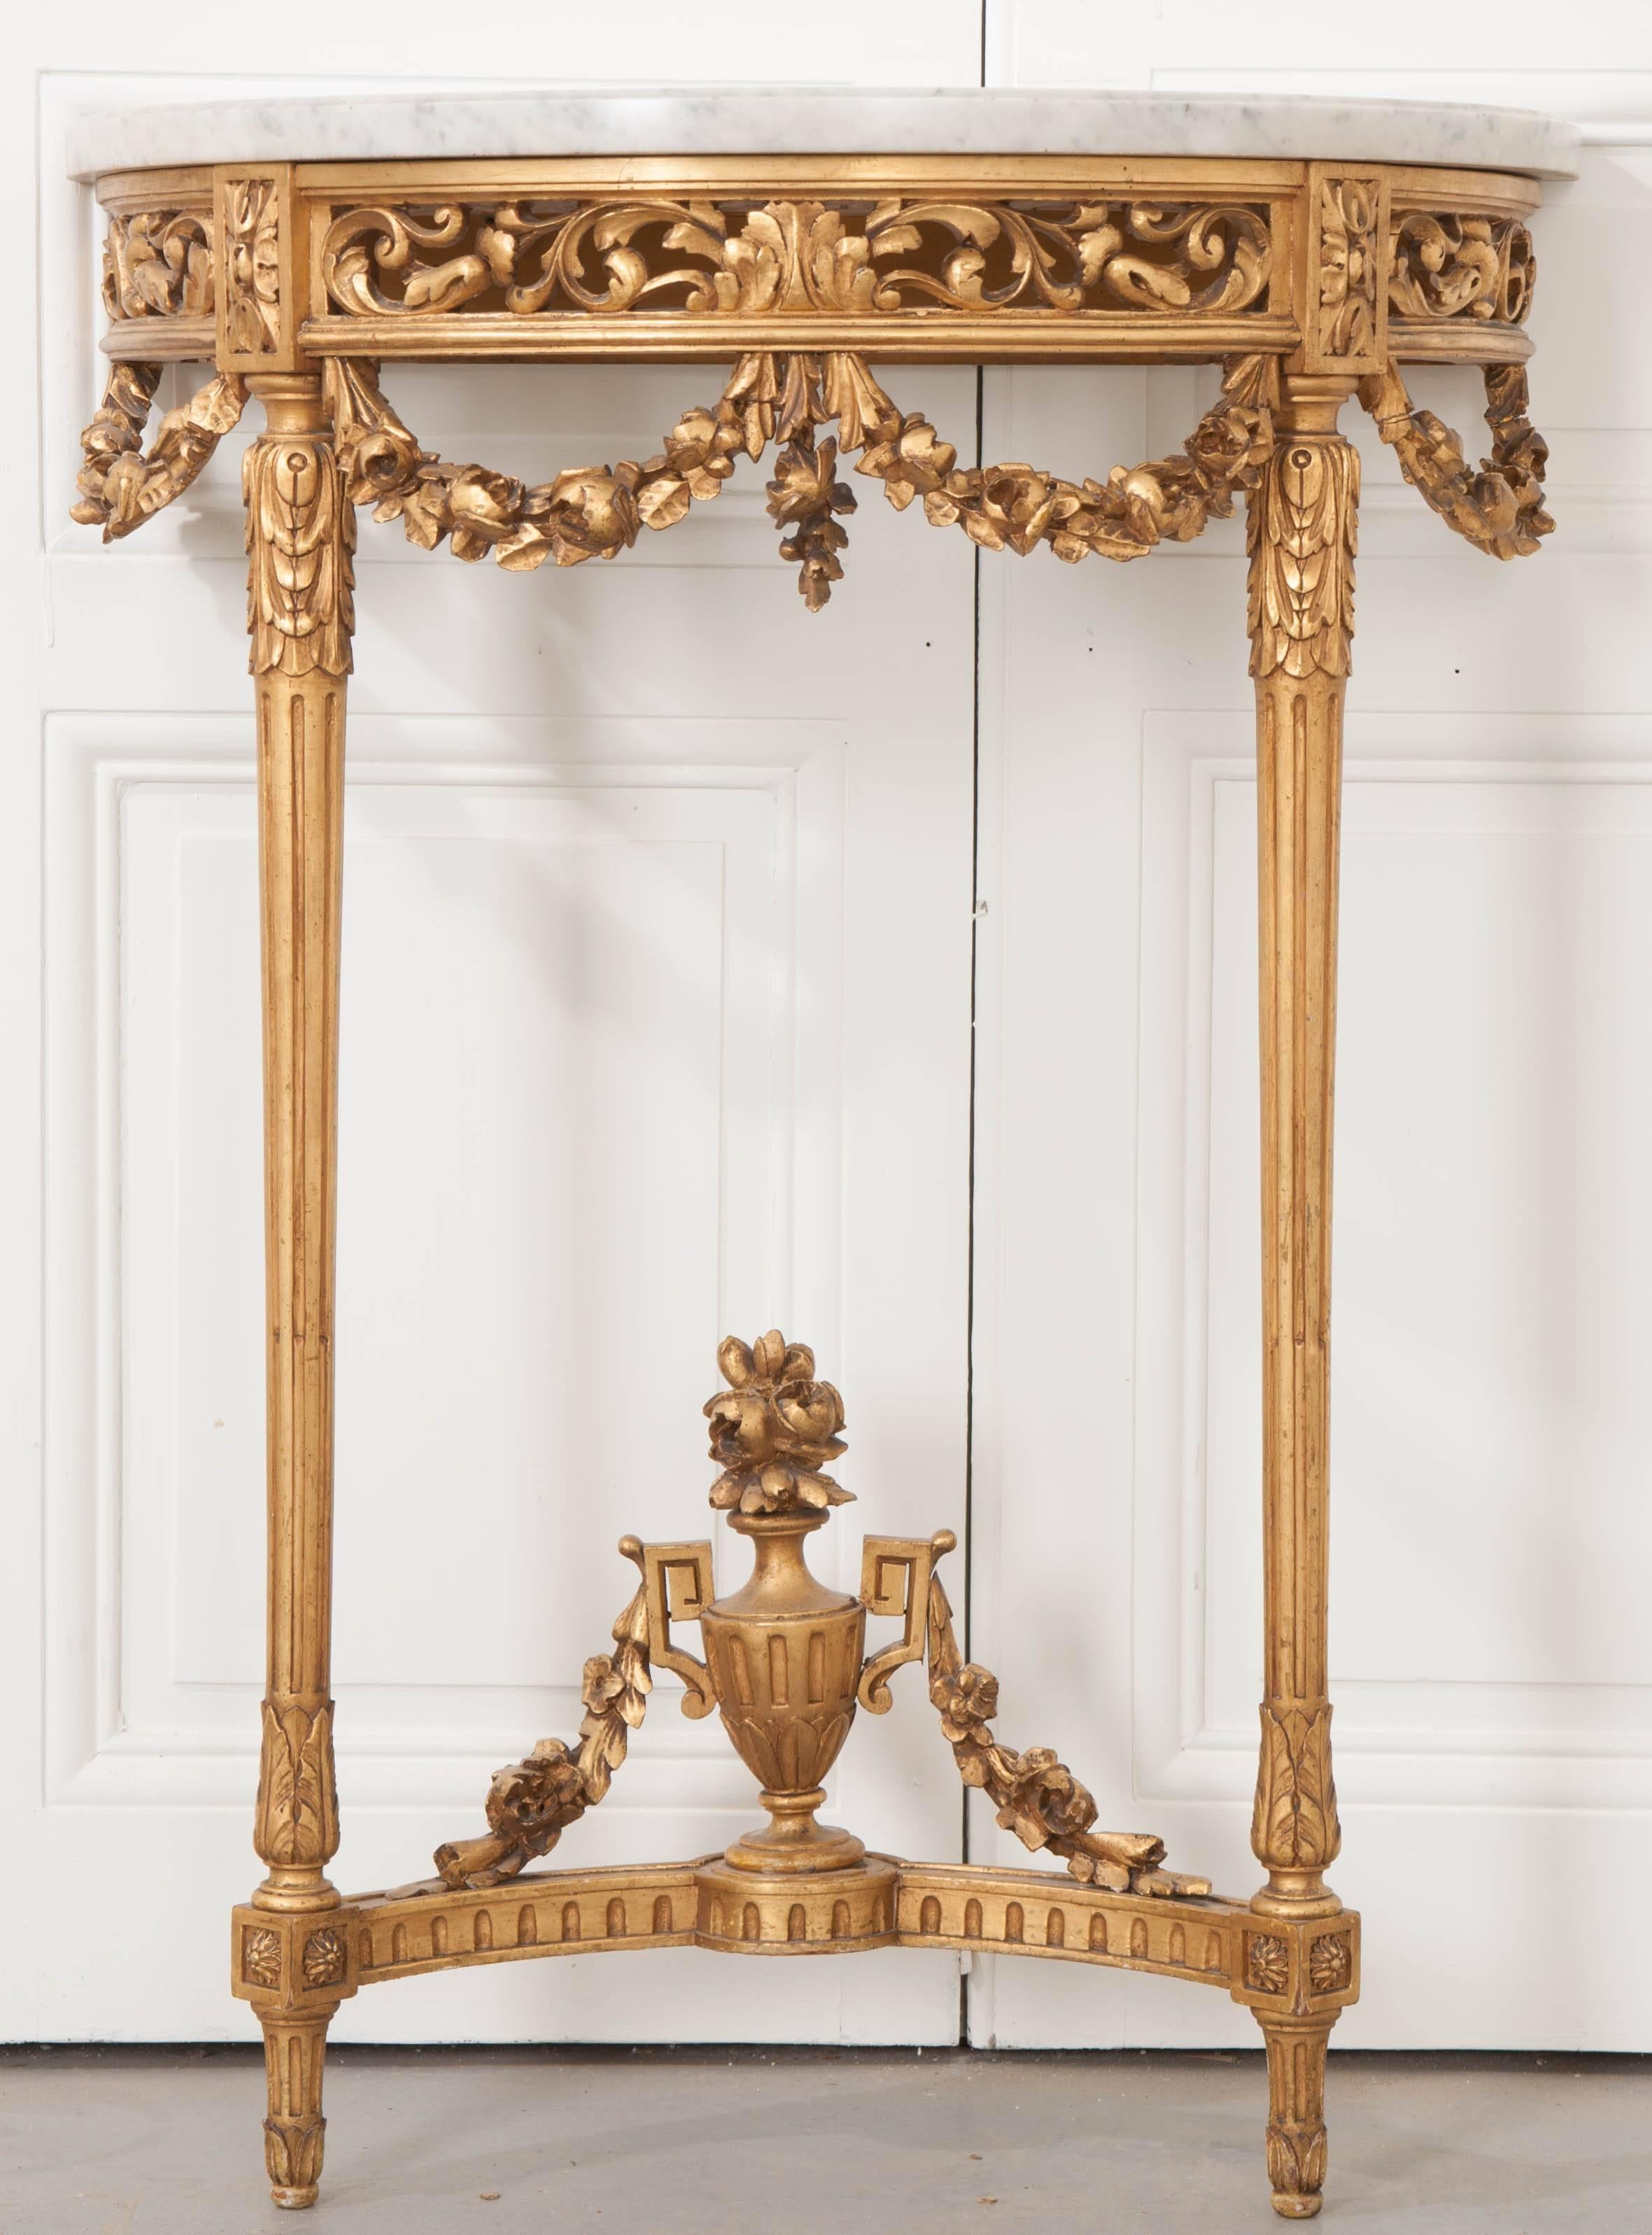 This radiant little console table was made in France, towards the middle of the 19th century. Clad in exceptionally well-preserved gold gilt, this table also boasts detailed carvings that are stunningly detailed. The gray, demilune-shaped marble top